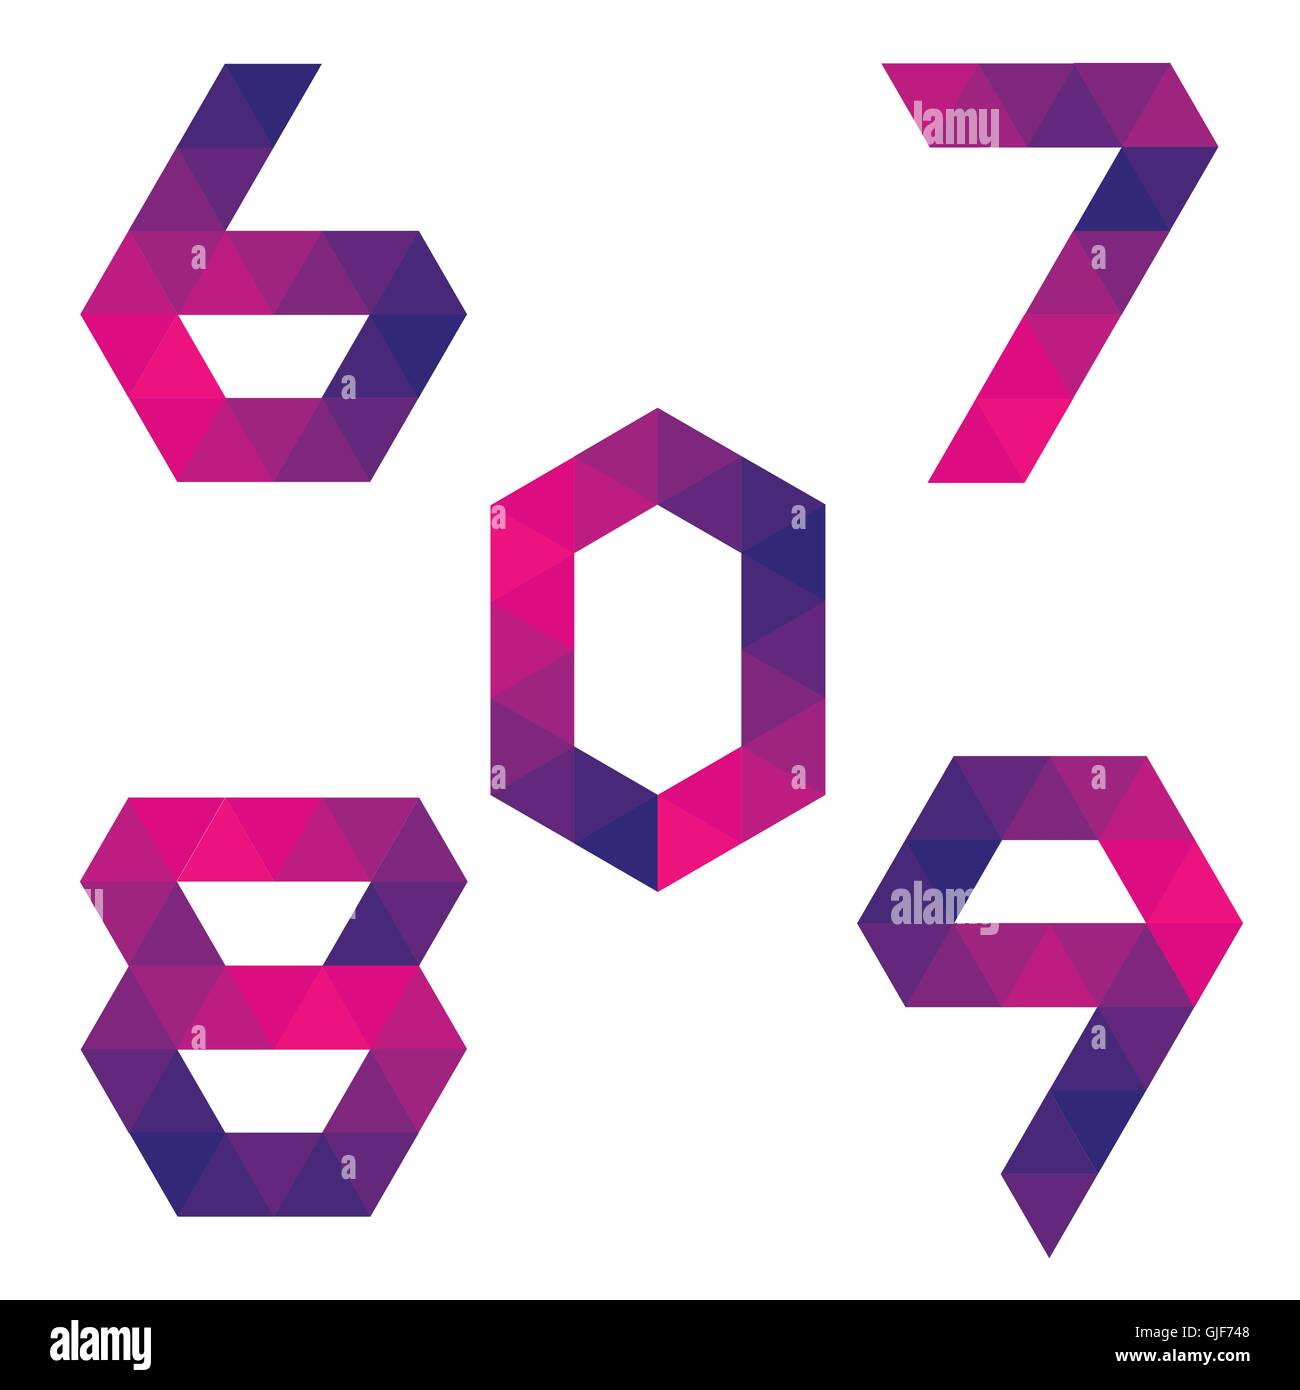 Series of numbers 6, 7, 8, 9, 0 formed by colored triangles. Geometric shape. White background. Isolated. Stock Vector